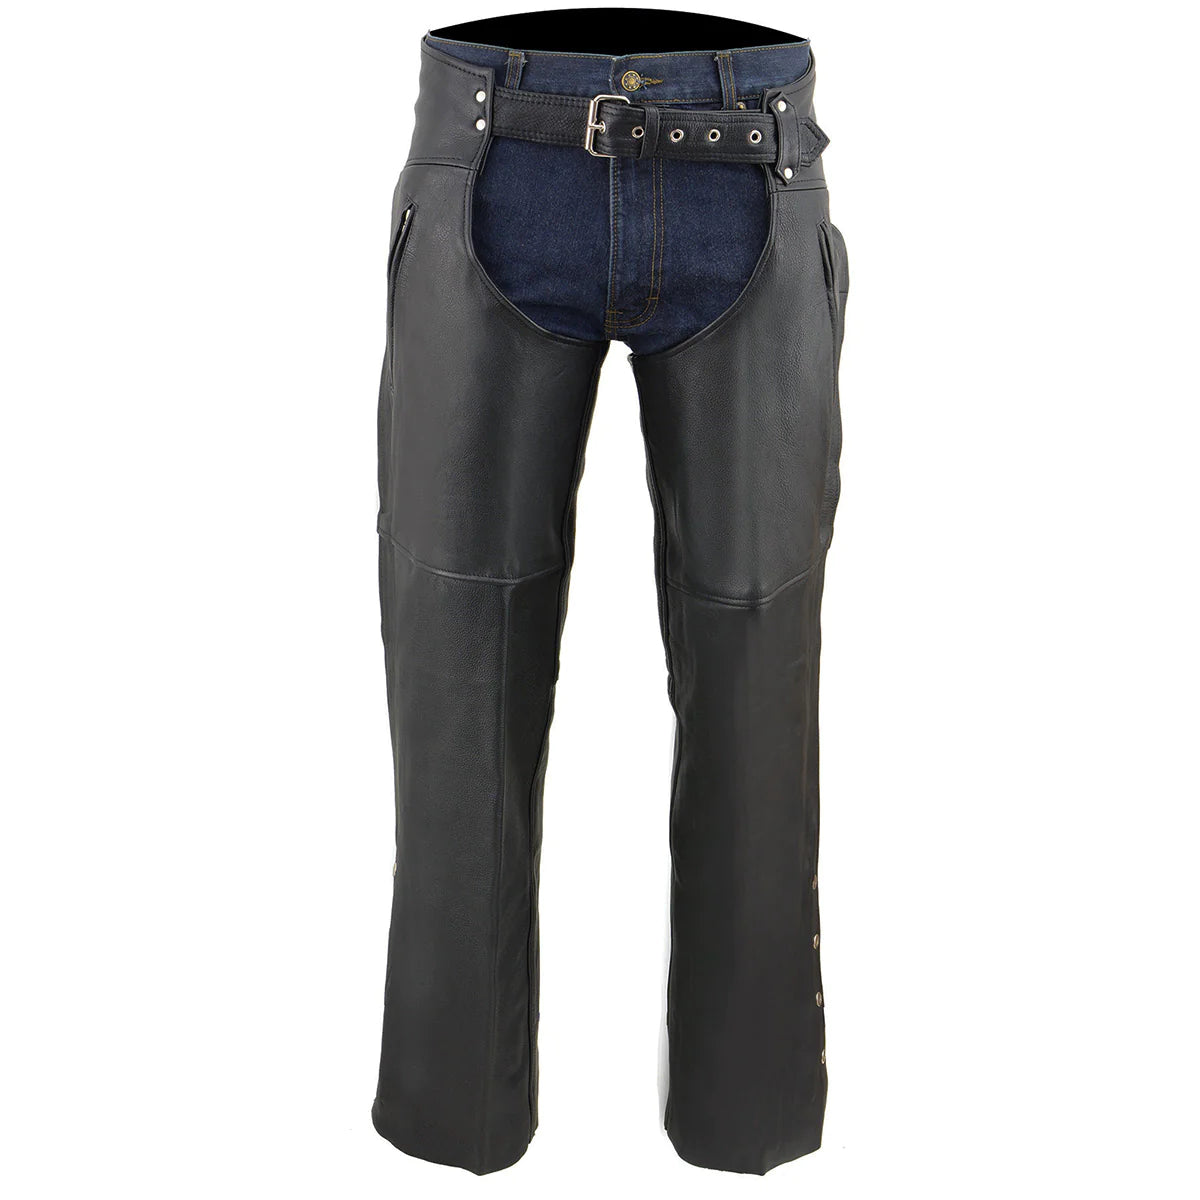 Men's Black Leather Chaps with Zippered Thigh Pockets